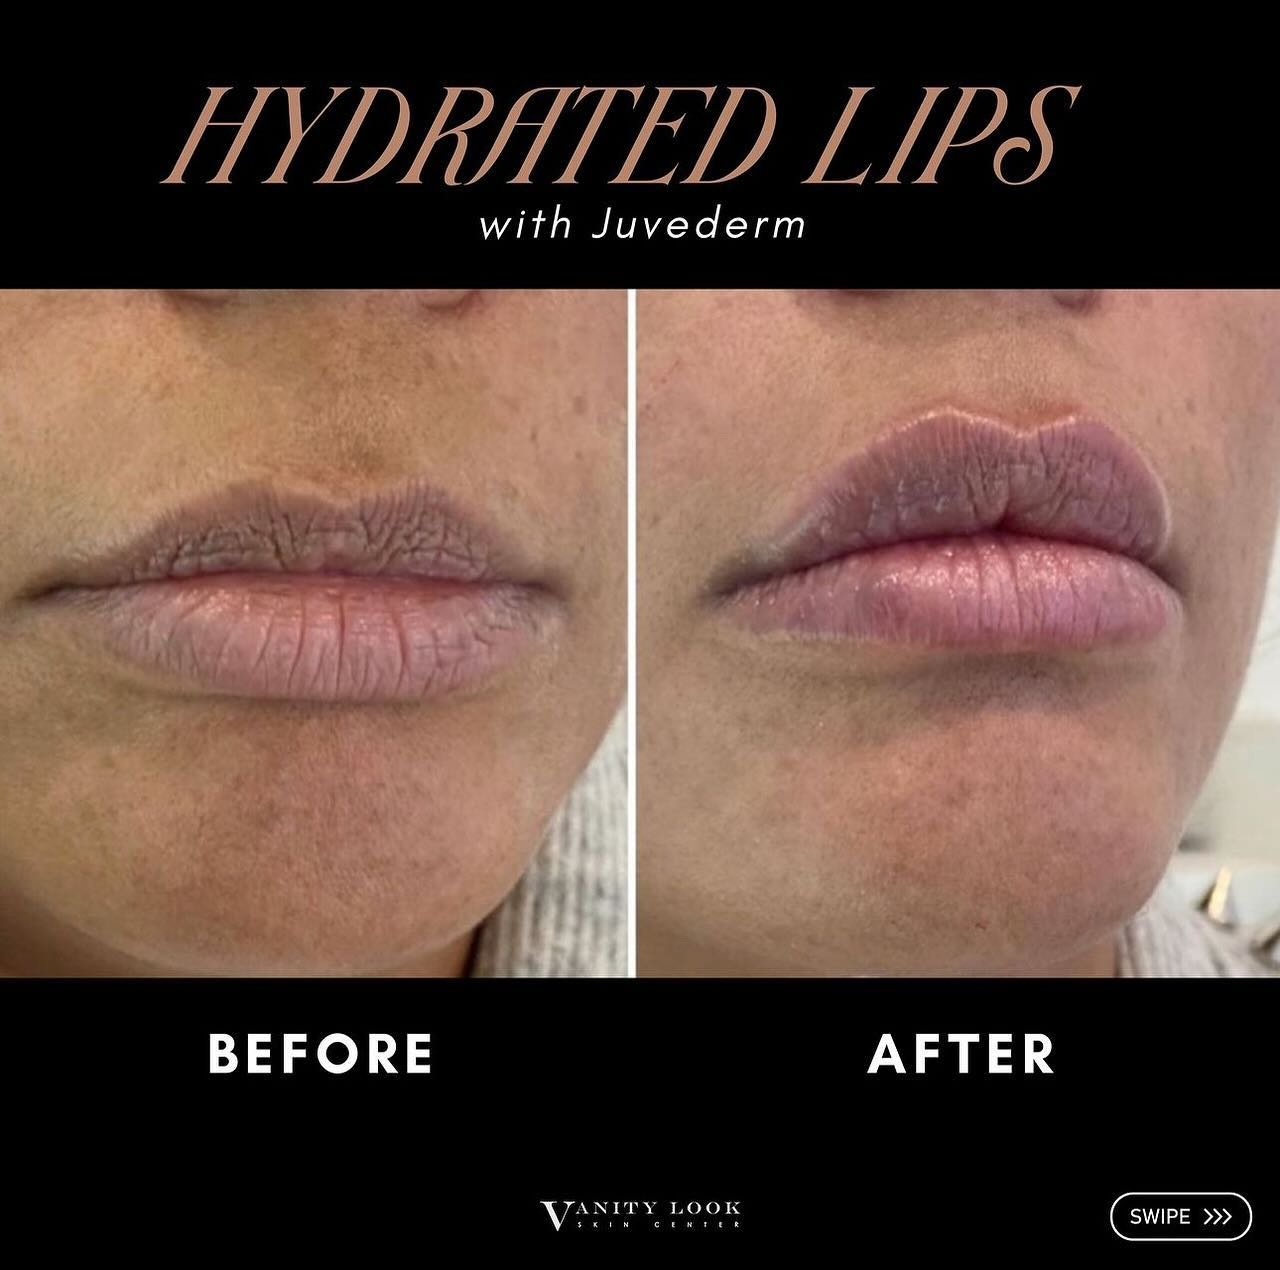 Lip perfection achieved with Juvederm! ✨ Take $75 off this filler by going to the link in our stories

To schedule an appointment, please call (818) 290-3938.

#lipfiller #lips #fillers #filler #nonsurgicalnoseaugmentation #nosefiller #rhinoplasty #v